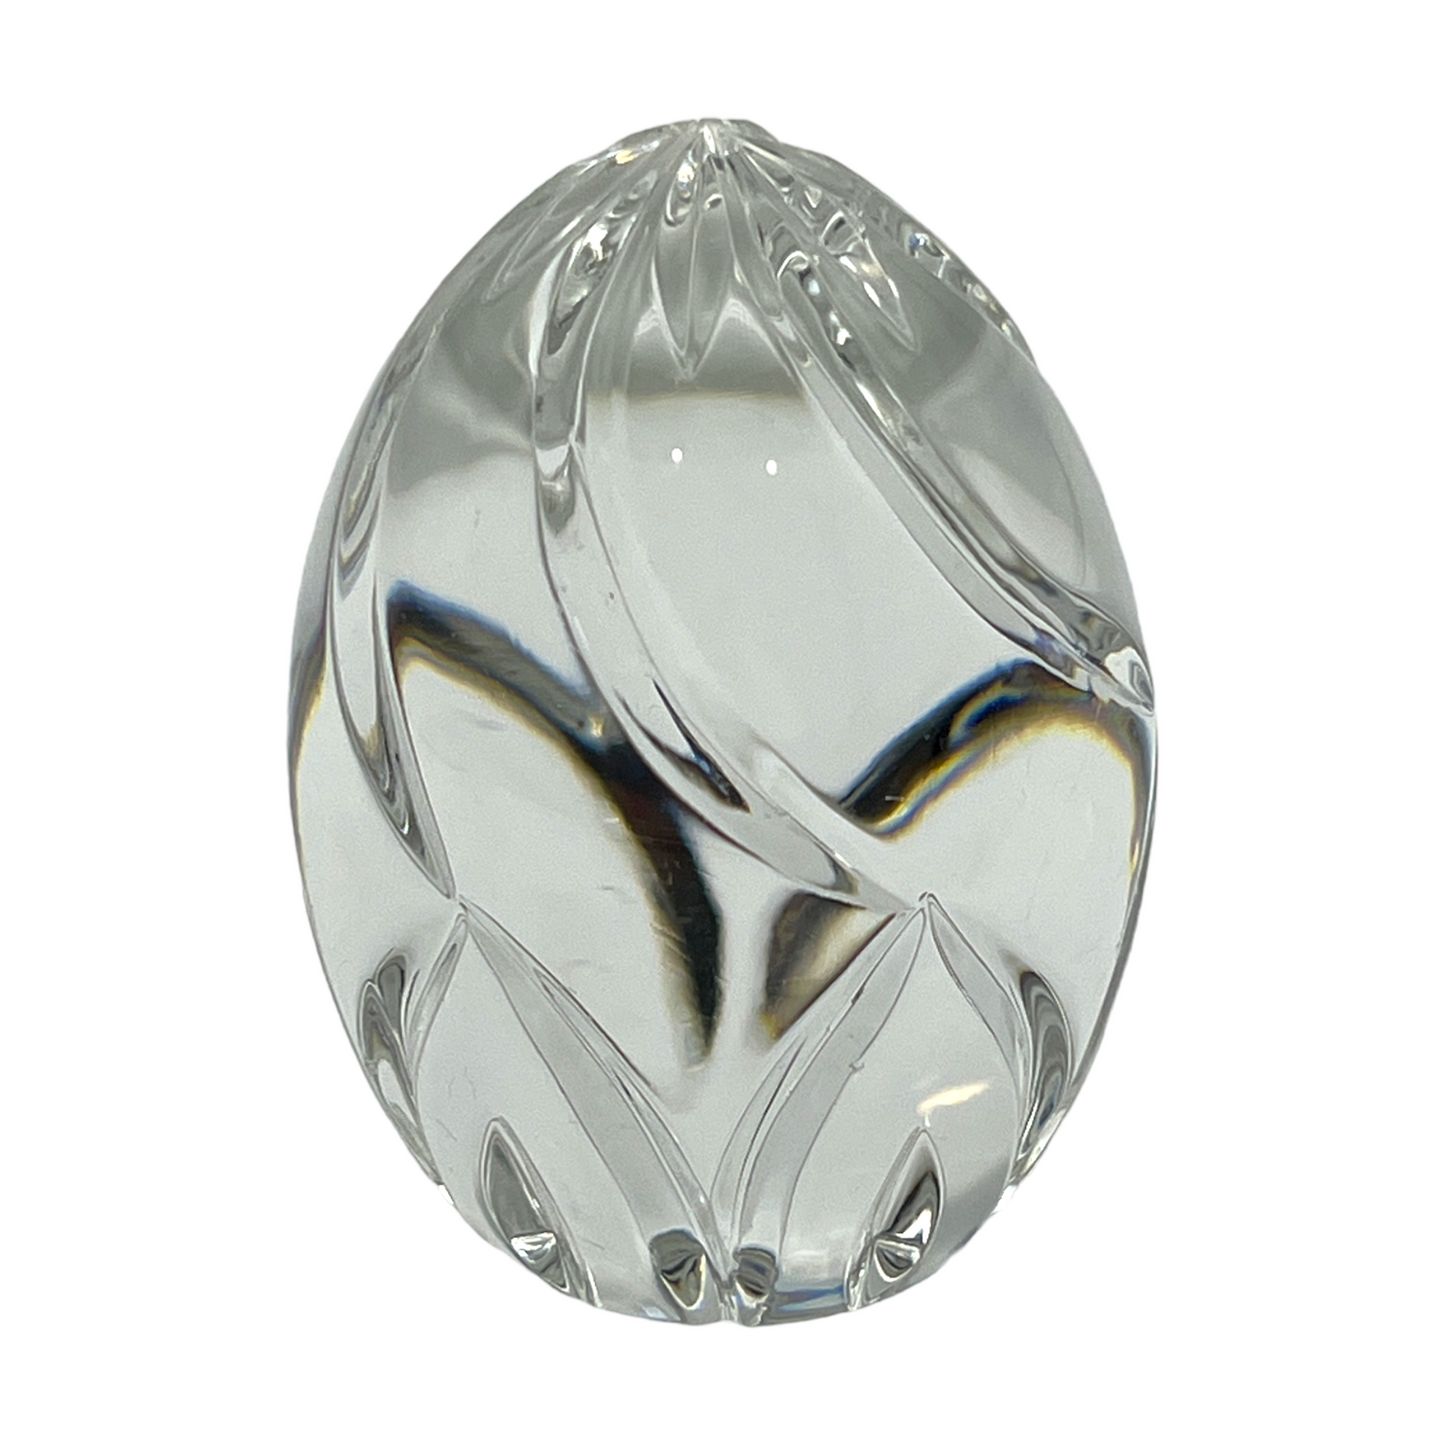 Ethereal Elegance: Crystal Egg Shaped Art Glass Paperweight - 3.25"